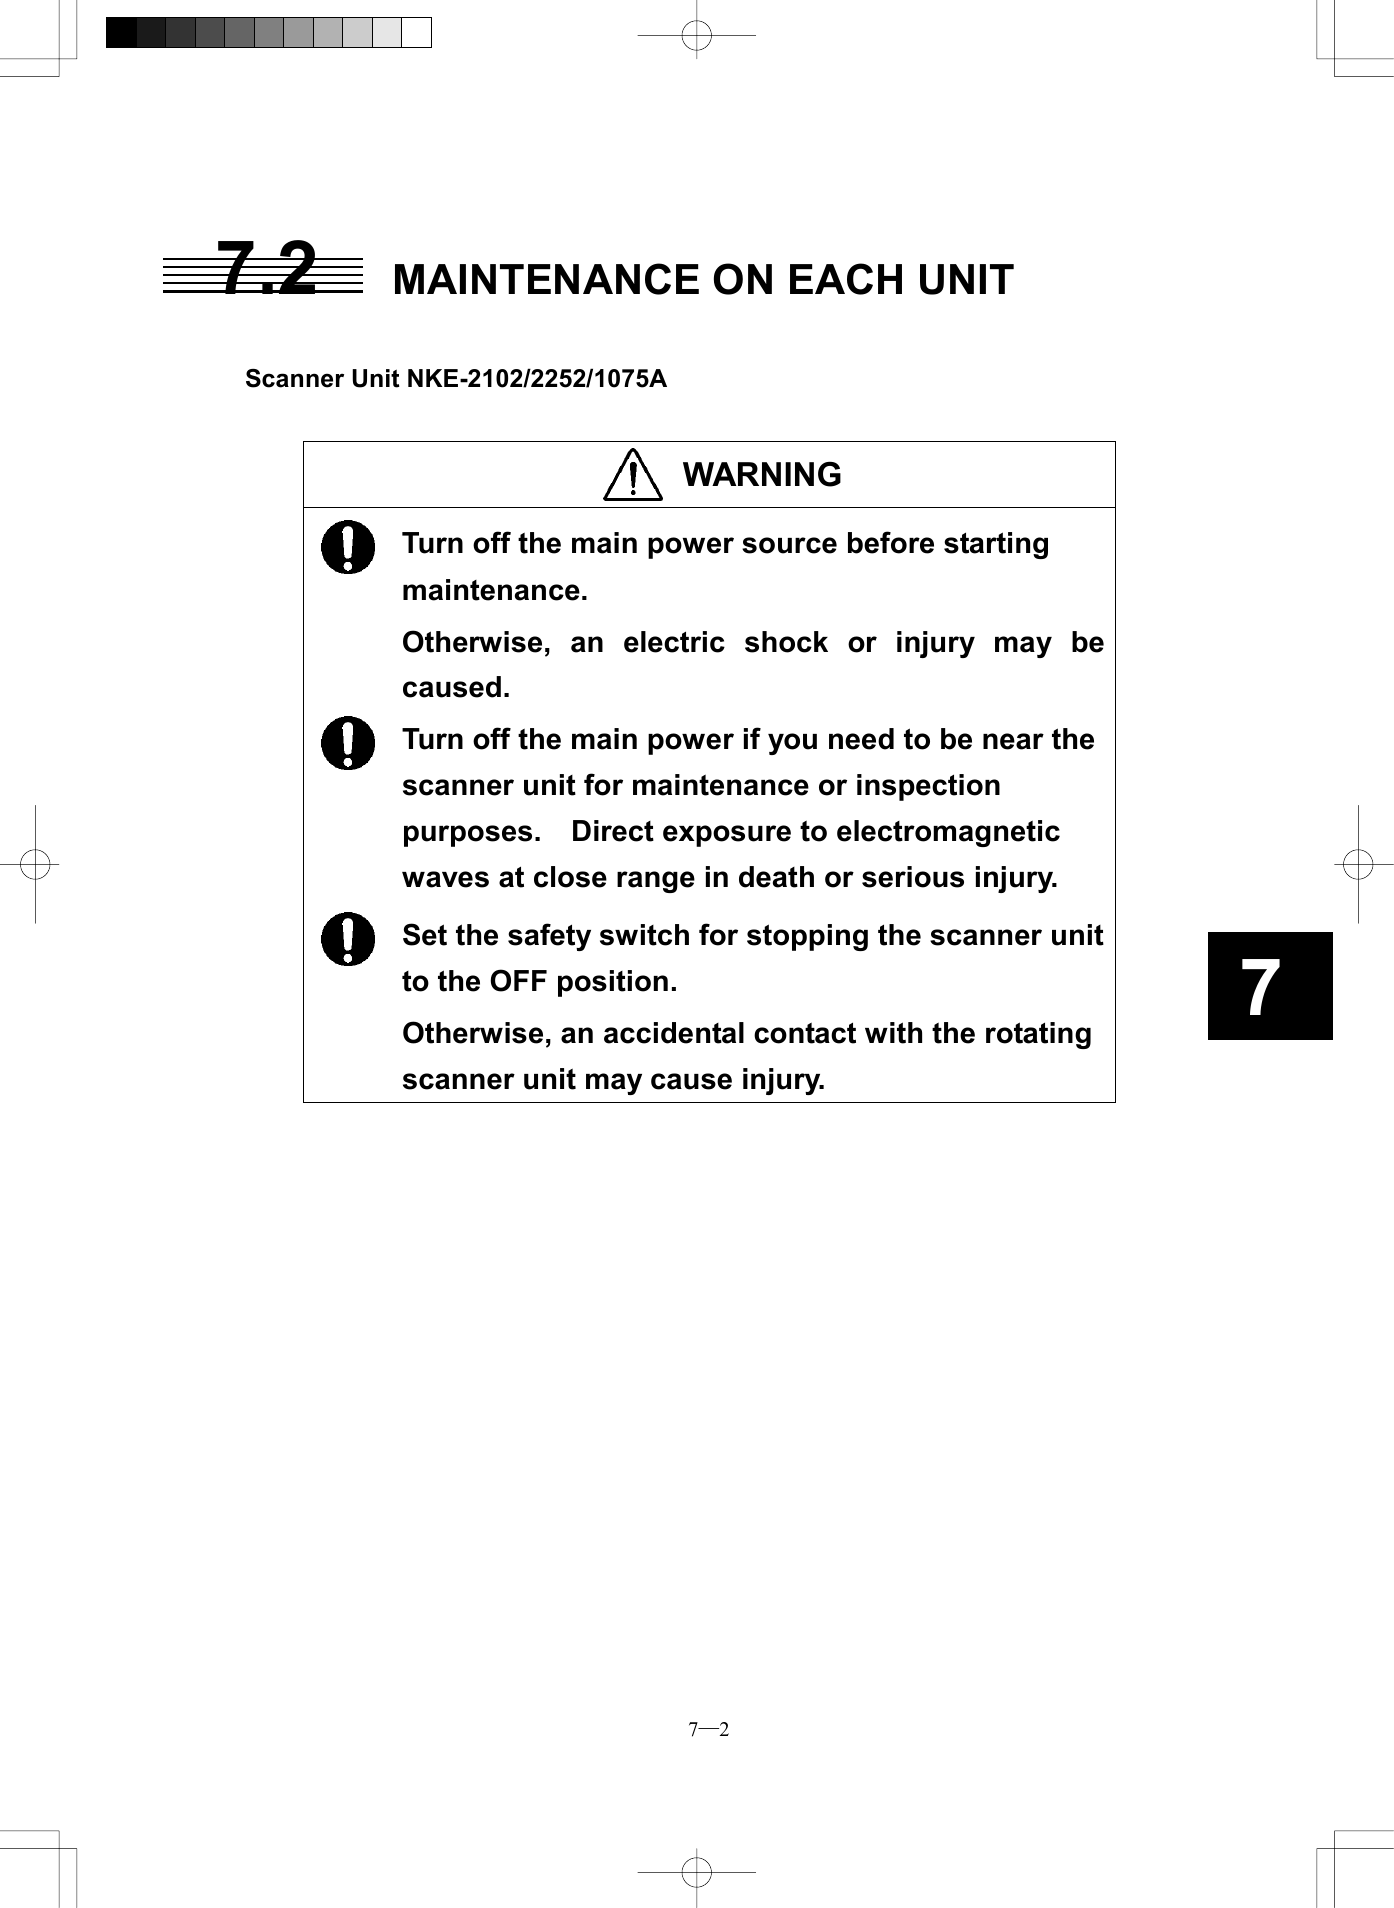  7─2 77.2  MAINTENANCE ON EACH UNIT   Scanner Unit NKE-2102/2252/1075A   WARNING   Turn off the main power source before starting maintenance. Otherwise, an electric shock or injury may be caused.  Turn off the main power if you need to be near the scanner unit for maintenance or inspection purposes.  Direct exposure to electromagnetic waves at close range in death or serious injury.  Set the safety switch for stopping the scanner unit to the OFF position. Otherwise, an accidental contact with the rotating scanner unit may cause injury.  